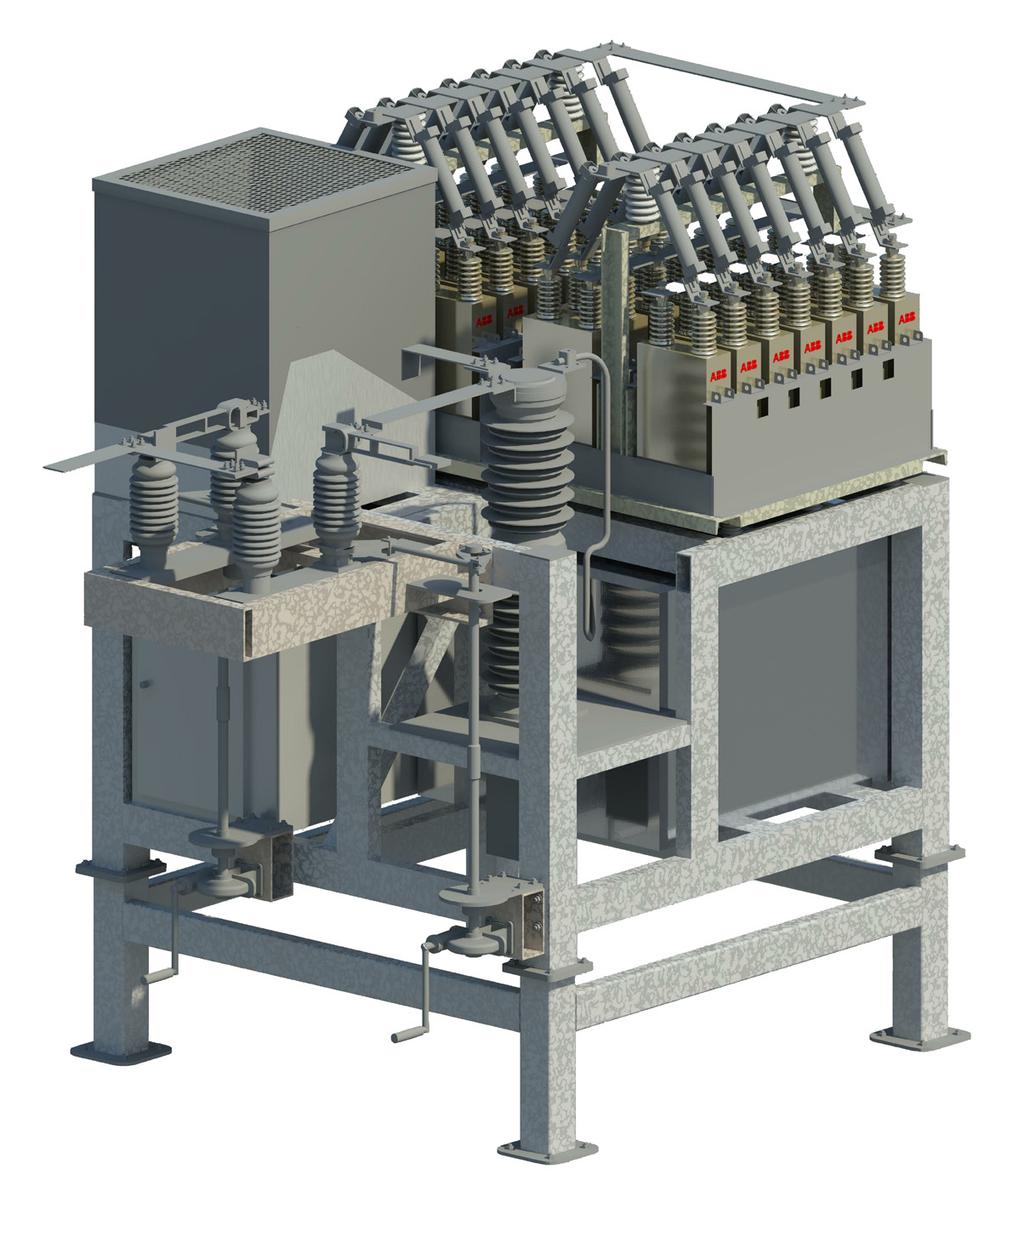 Features Triple DuraGap TM spark gap protection A triple spark gap assembly provides transformer and system protection in the unlikely event of a simultaneous ground fault while the system is in its